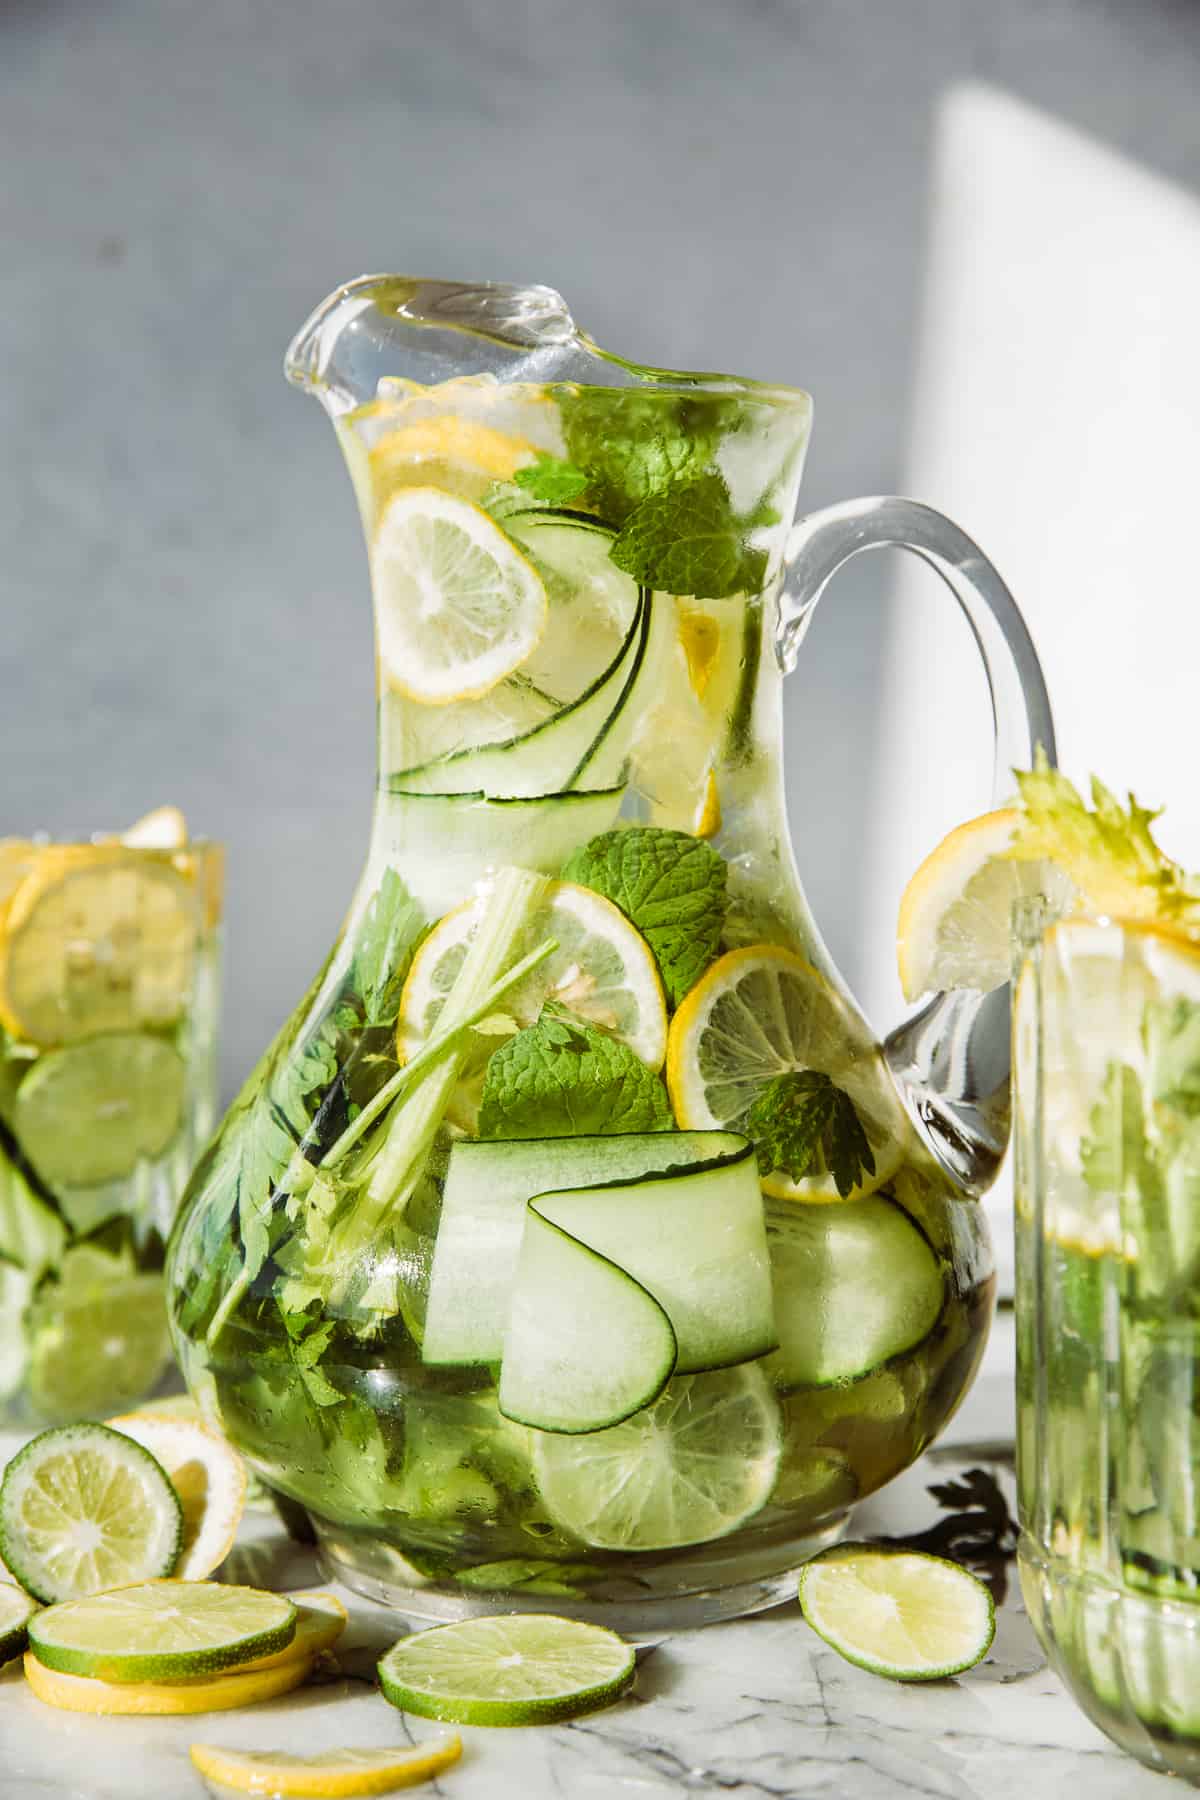 How to Make Infused Water, Tips for Making Your Own Flavored Water